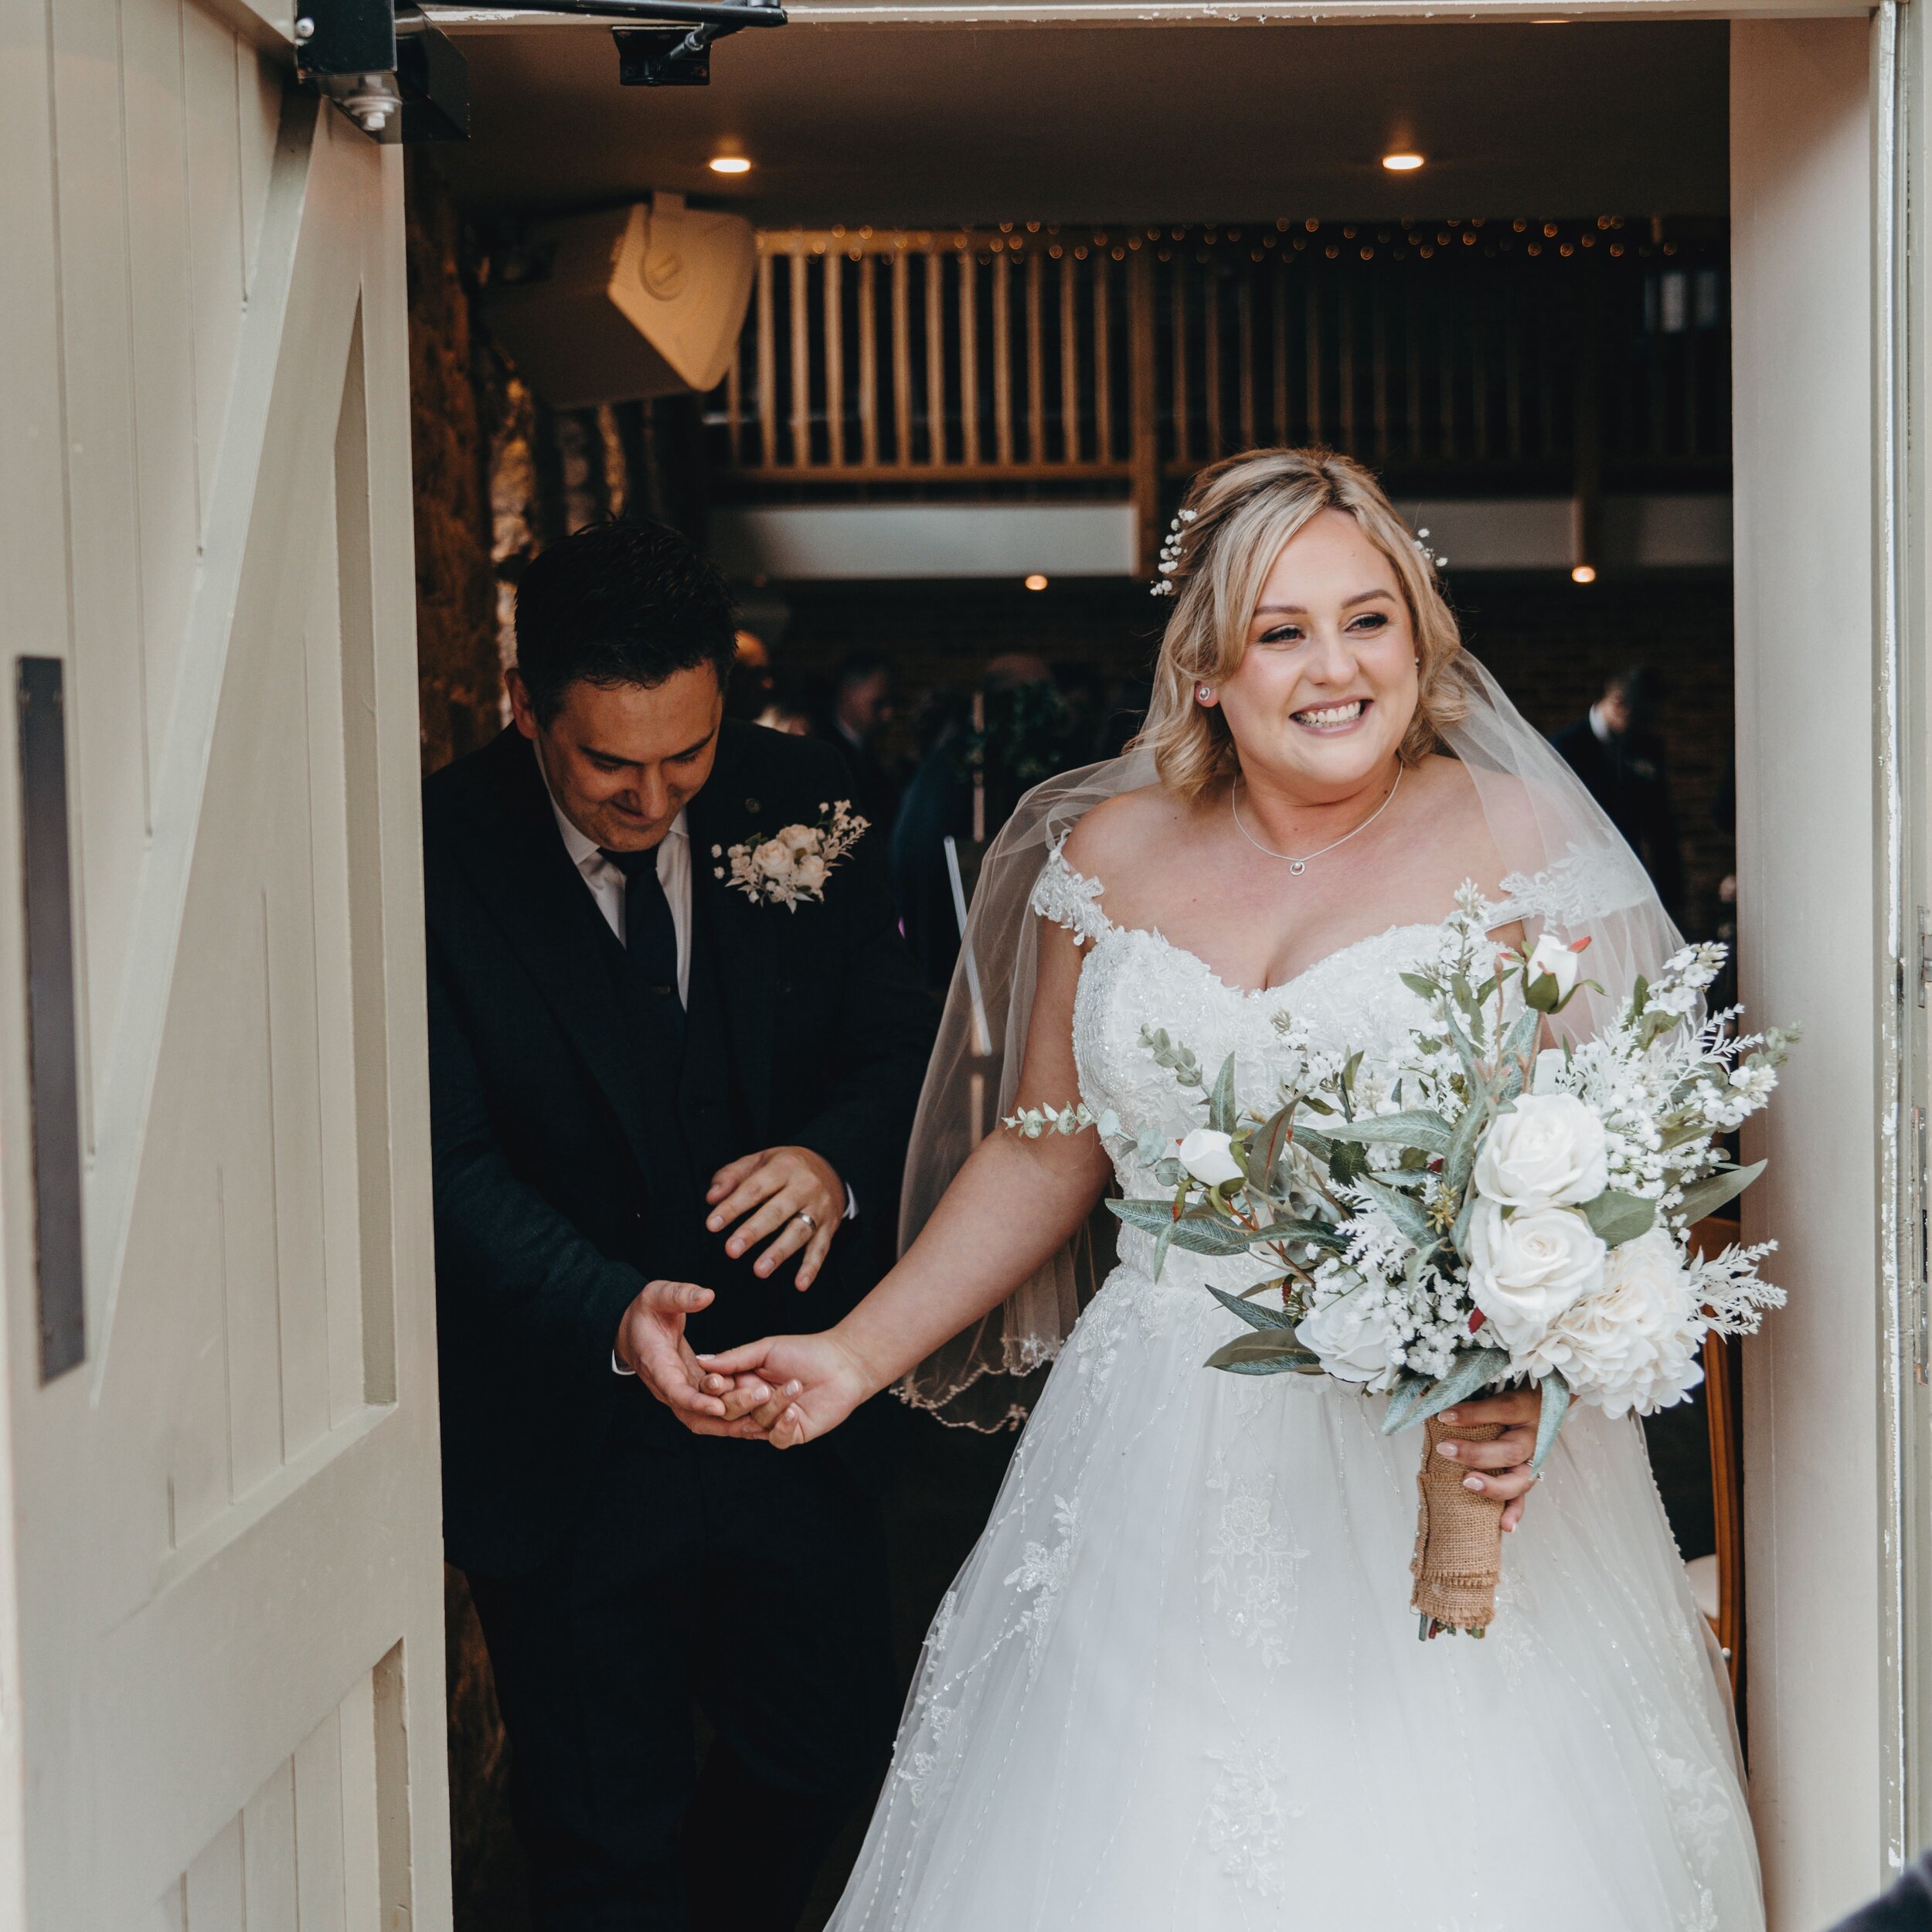 that look of pure happiness after getting hitched! 🥳🥰 #bridetobe #wedding #staffordshirewedding 

Venue: @theashesbarns